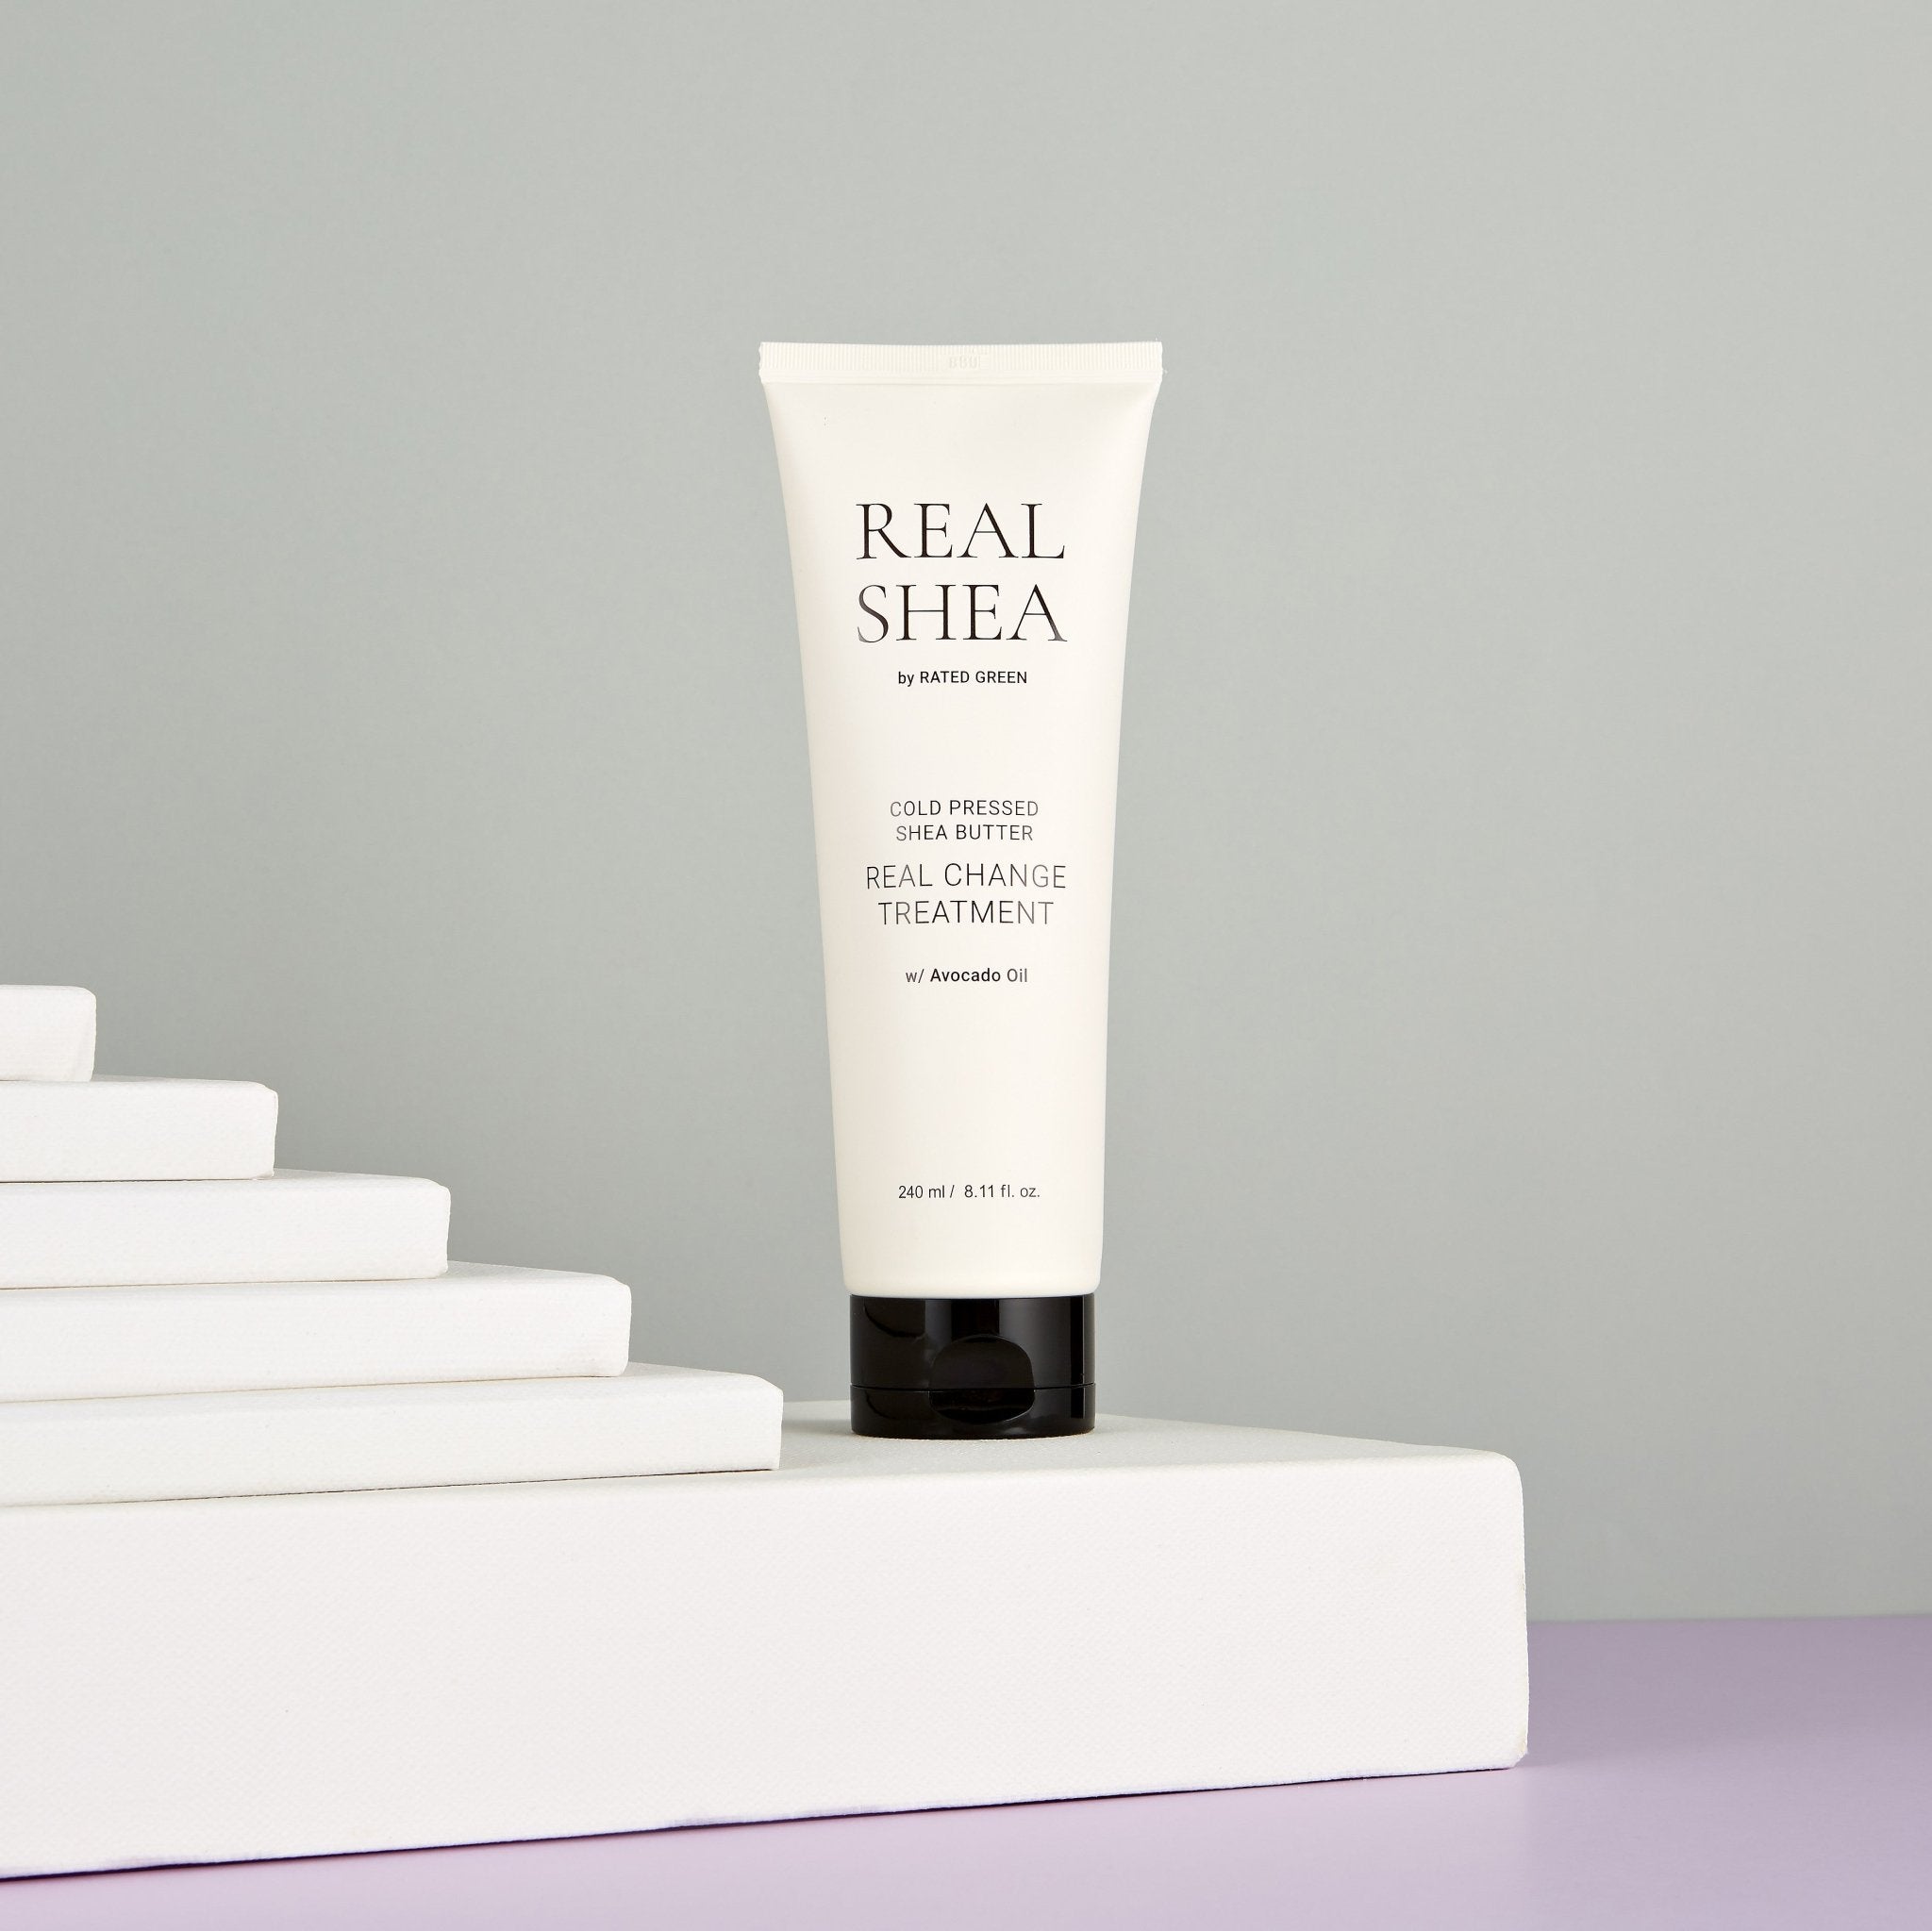 Rated Green REAL SHEA REAL CHANGE TREATMENT - Beauty Matters